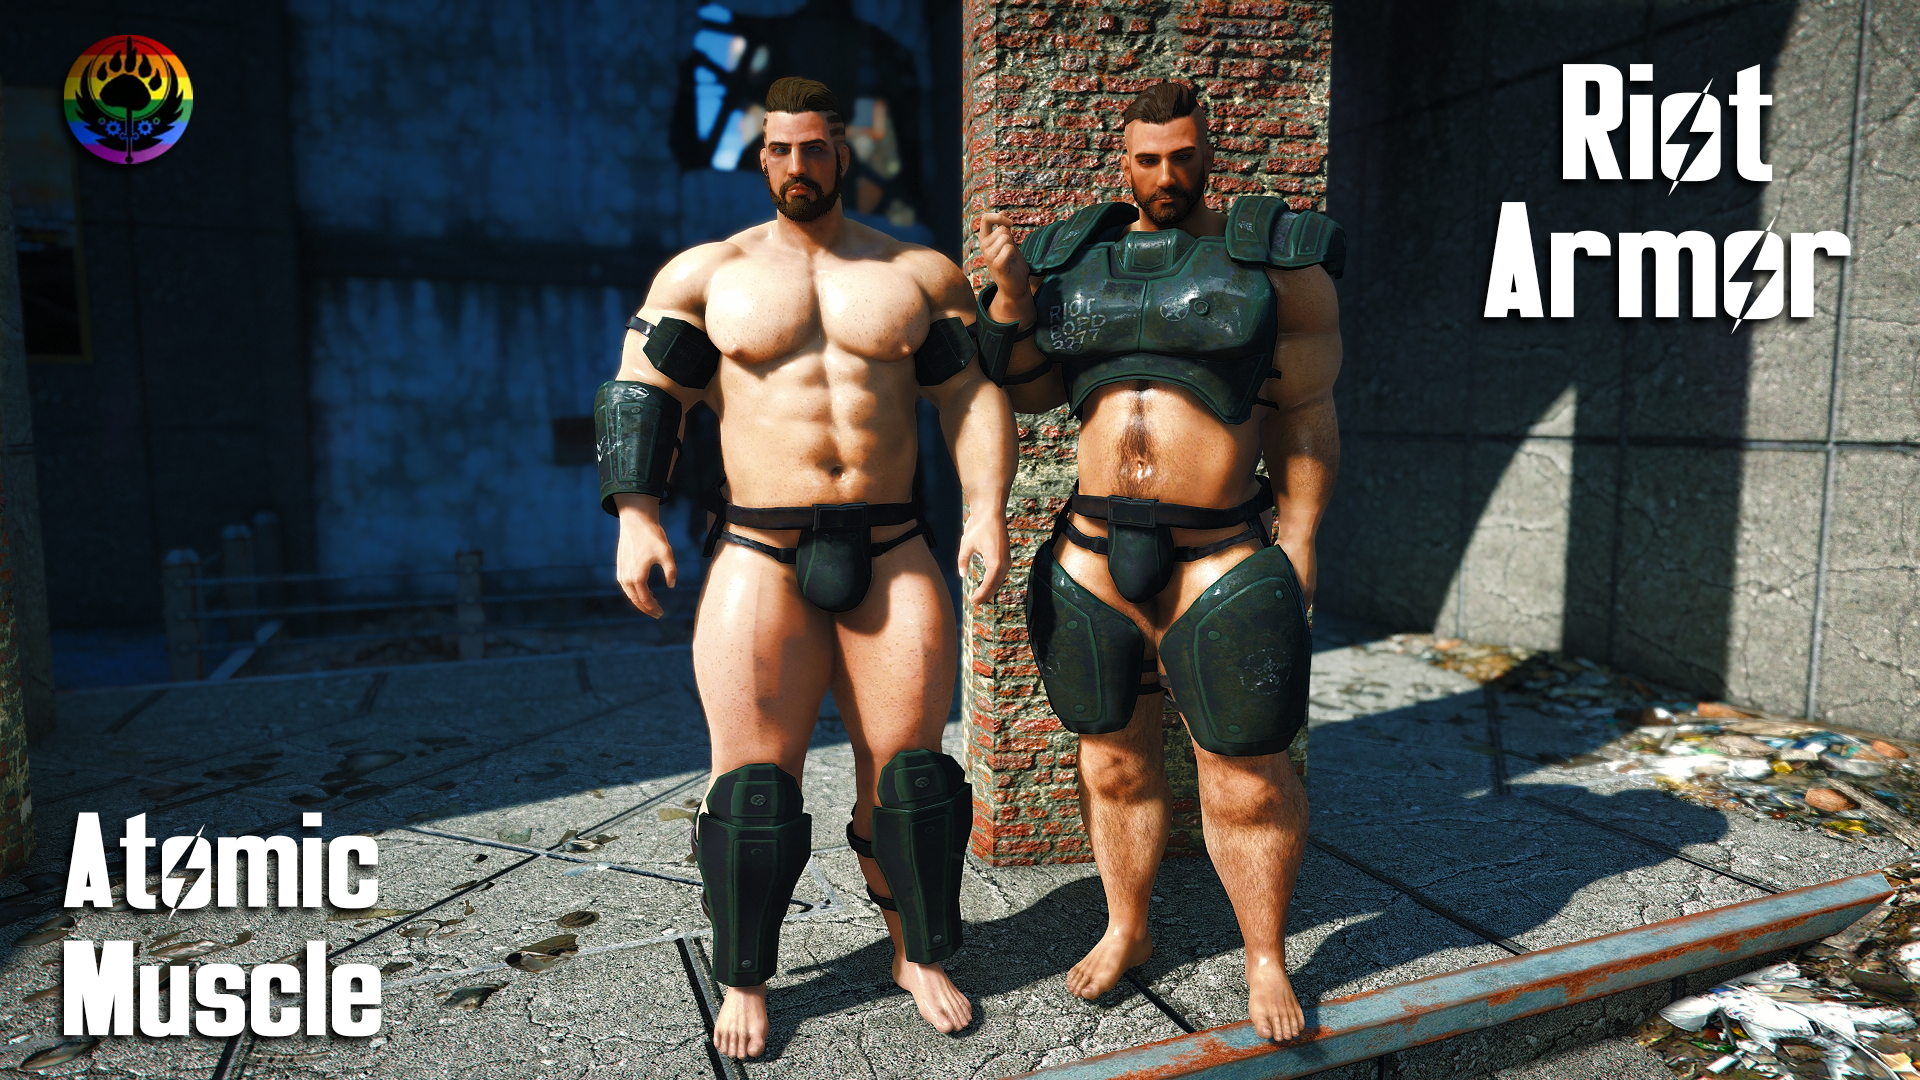 Riot Armor (Gay Redux) for Atomic Muscle